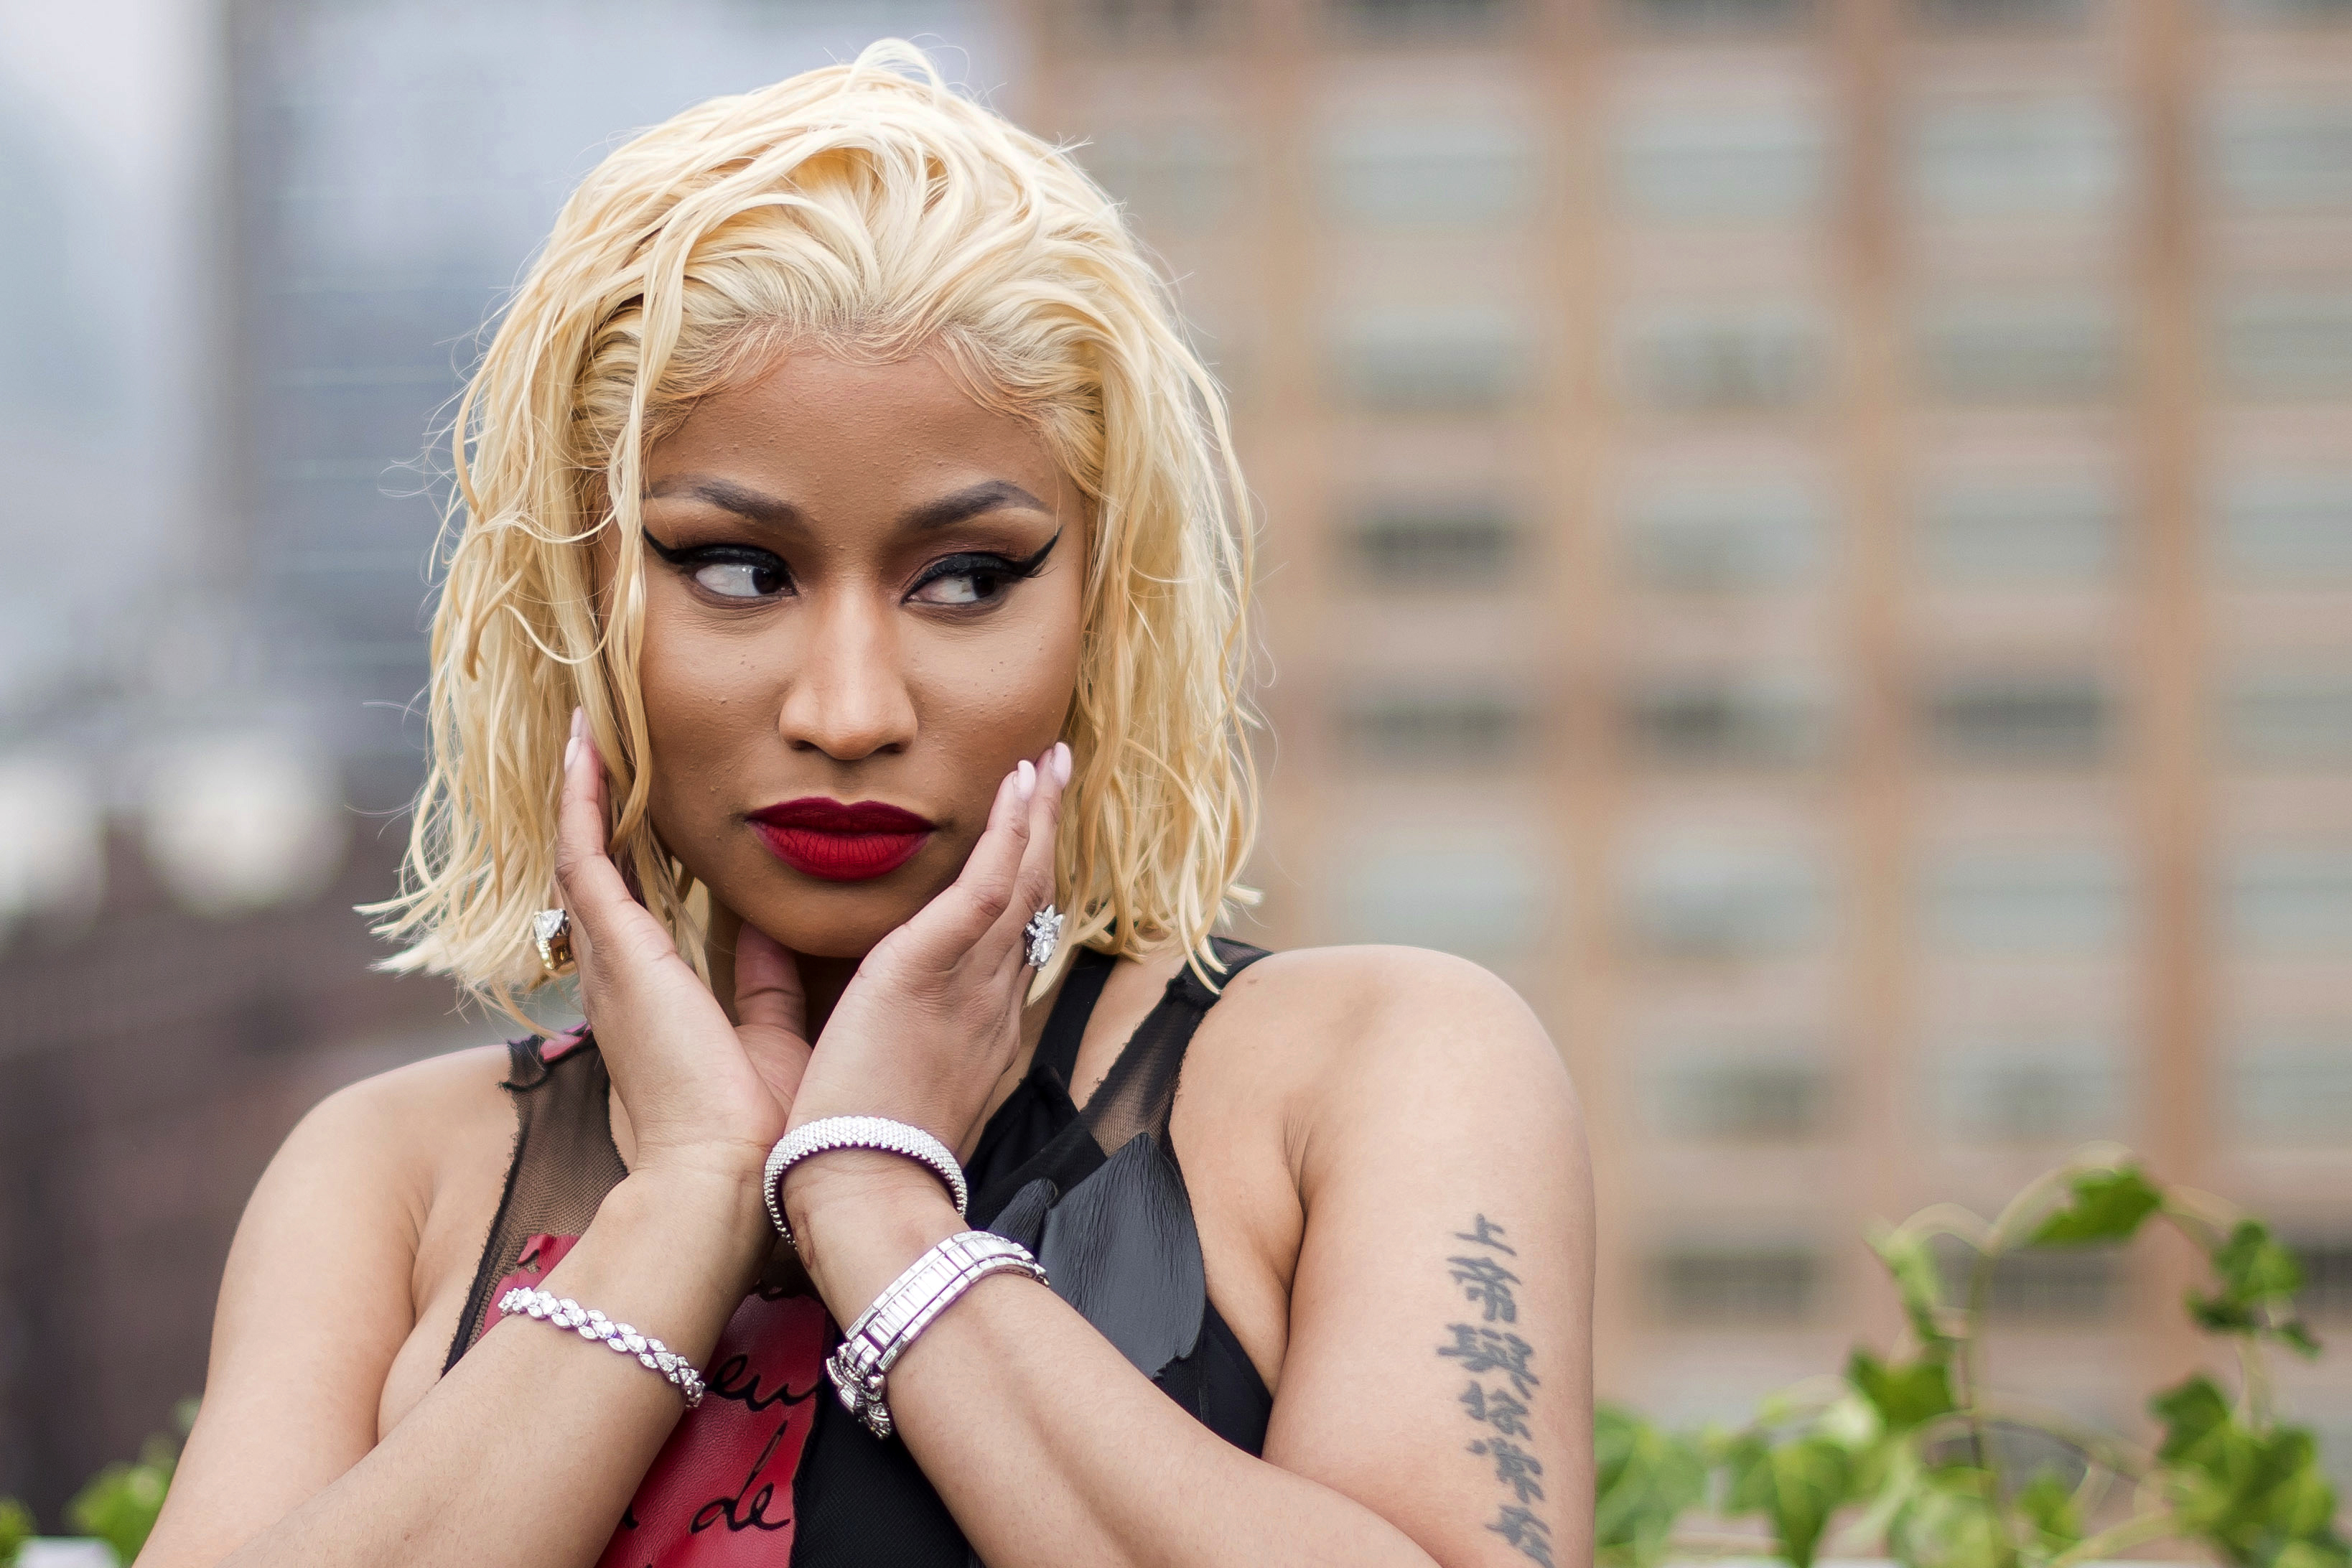 Stanford Infectious Disease Expert Sets Record Straight on Nicki Minaj’s COVID Vaccination Tweets